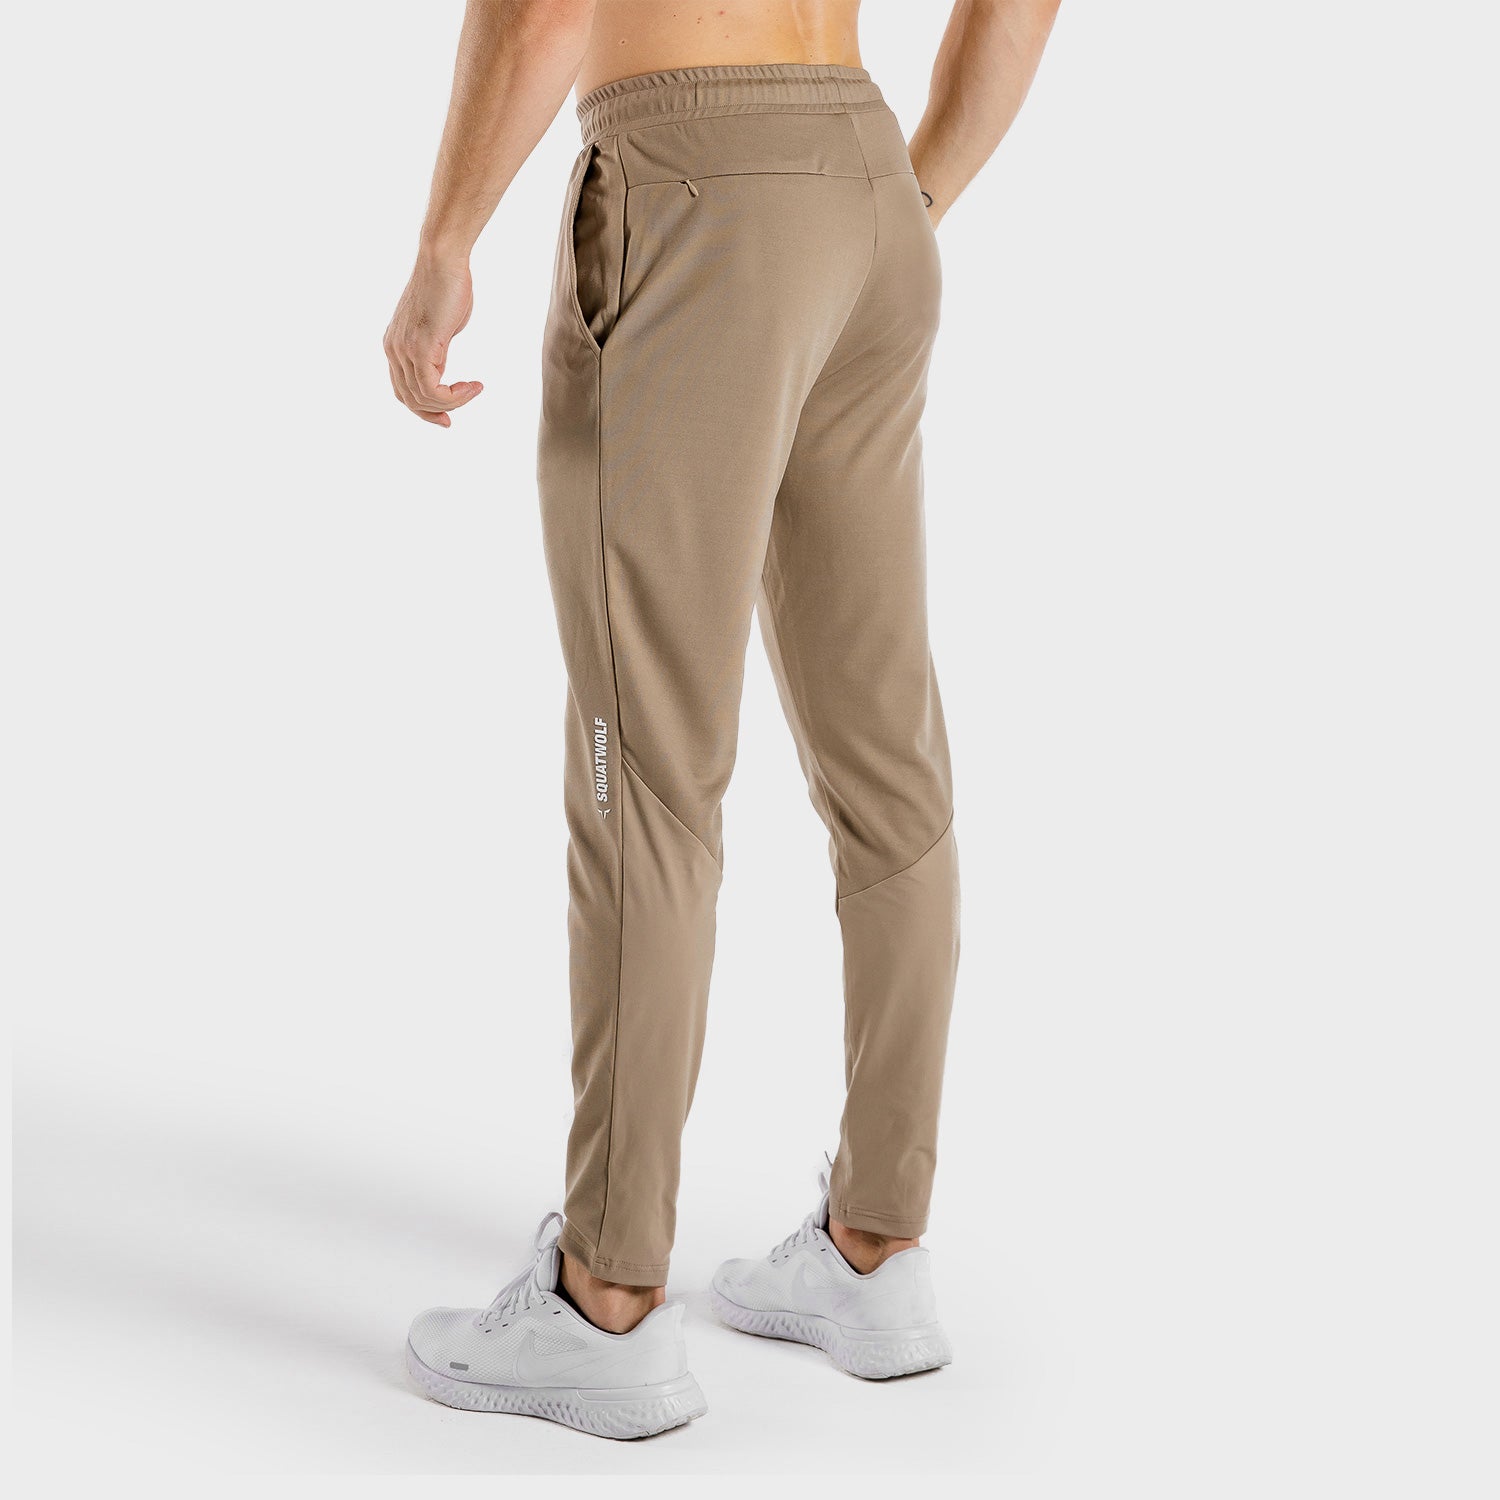 squatwolf-workout-pants-for-men-flux-joggers-taupe-gym-wear